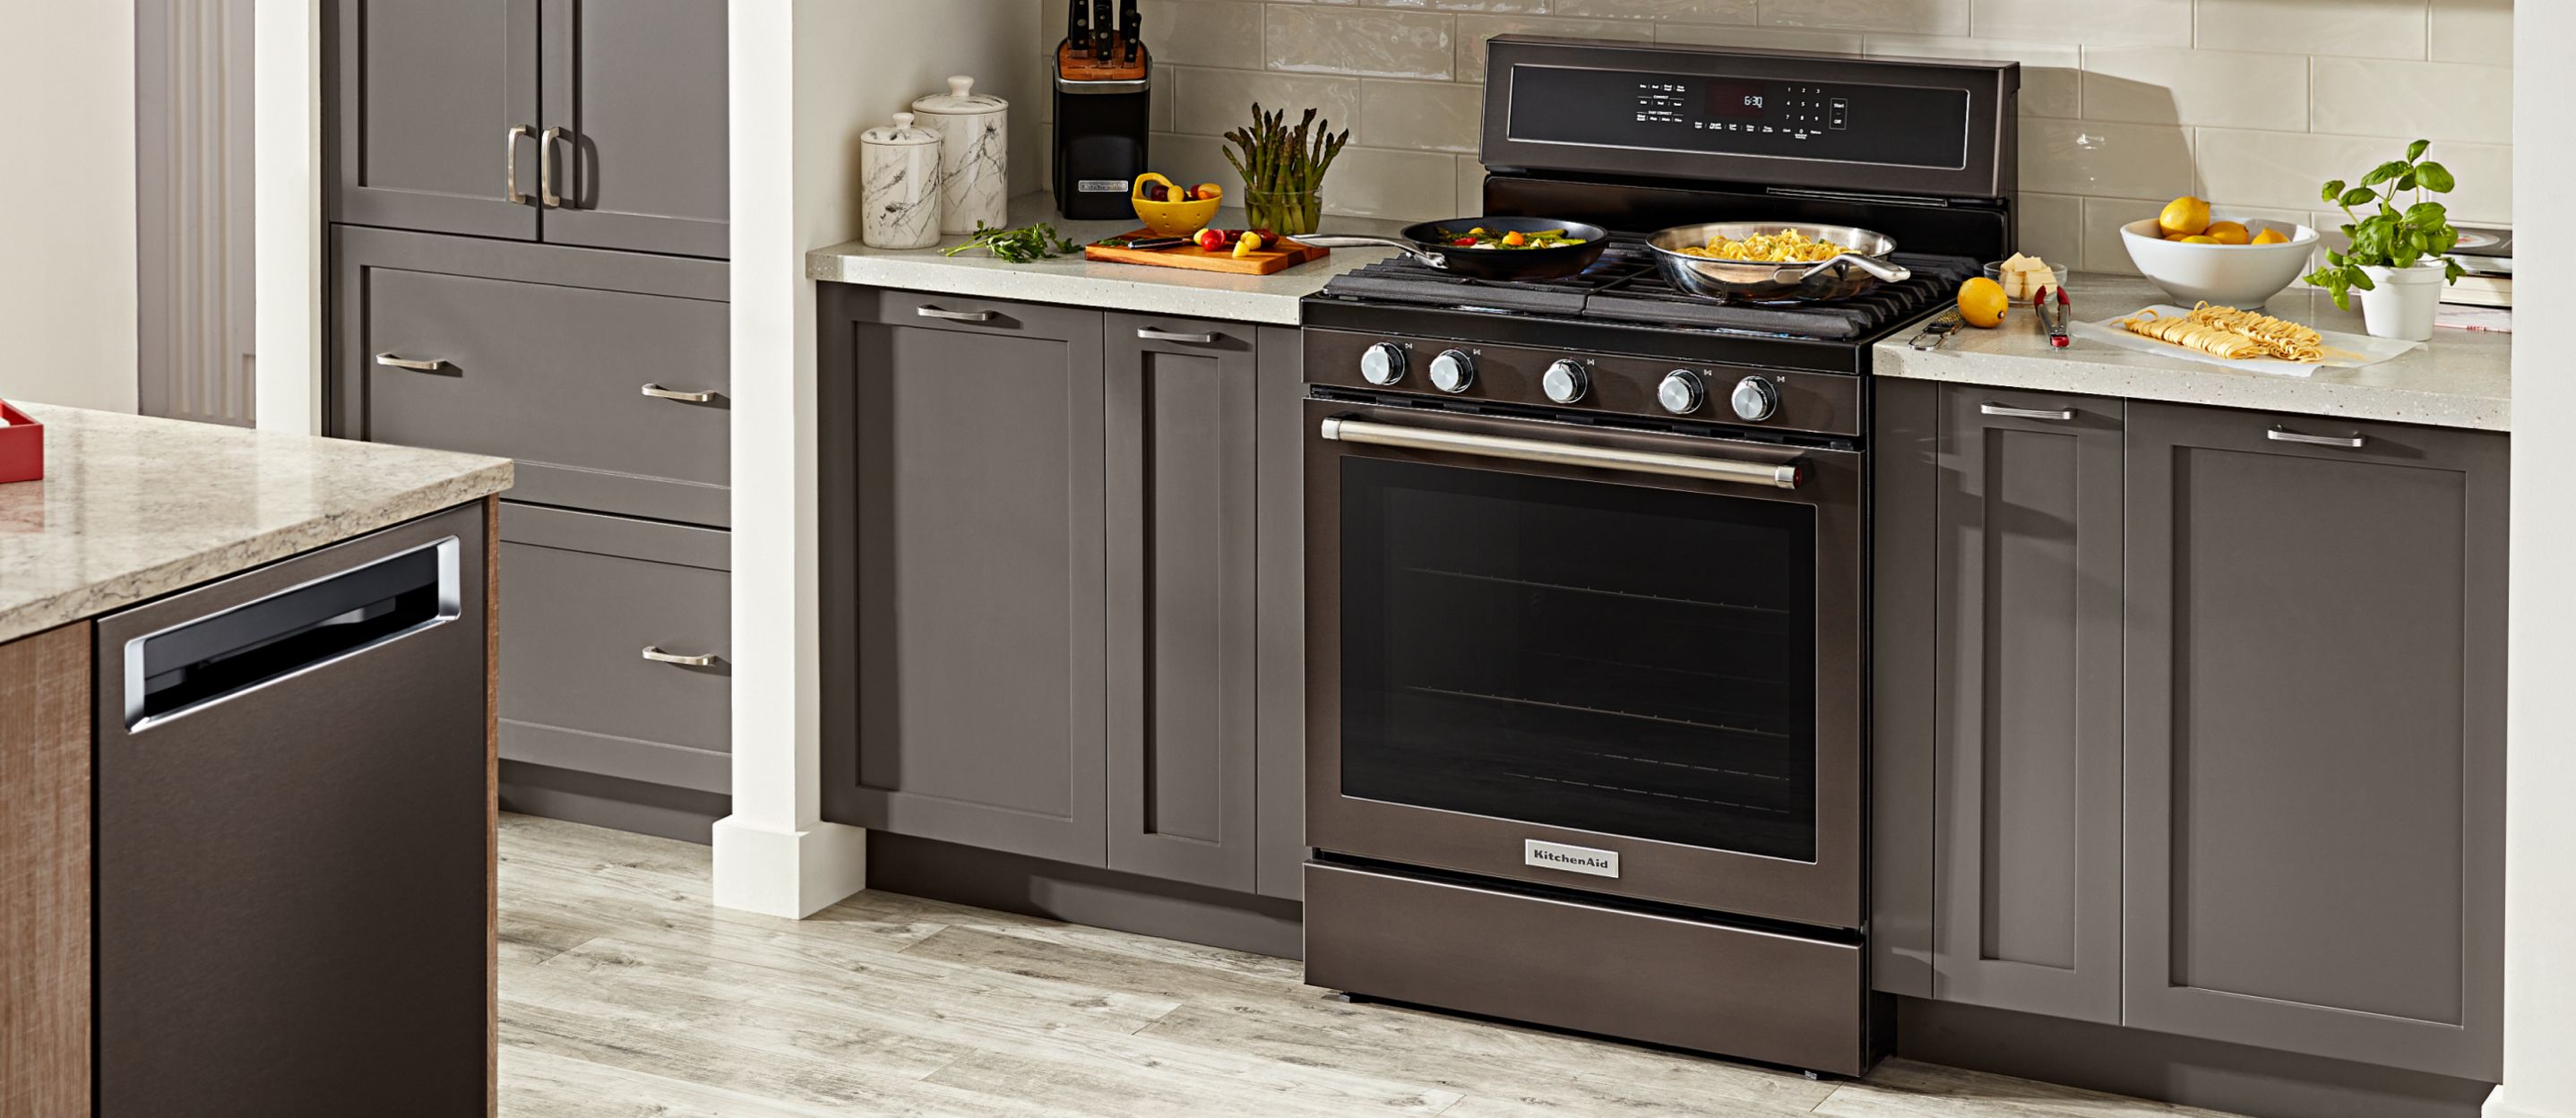 Save with limited-time offers on KitchenAid® major appliances.